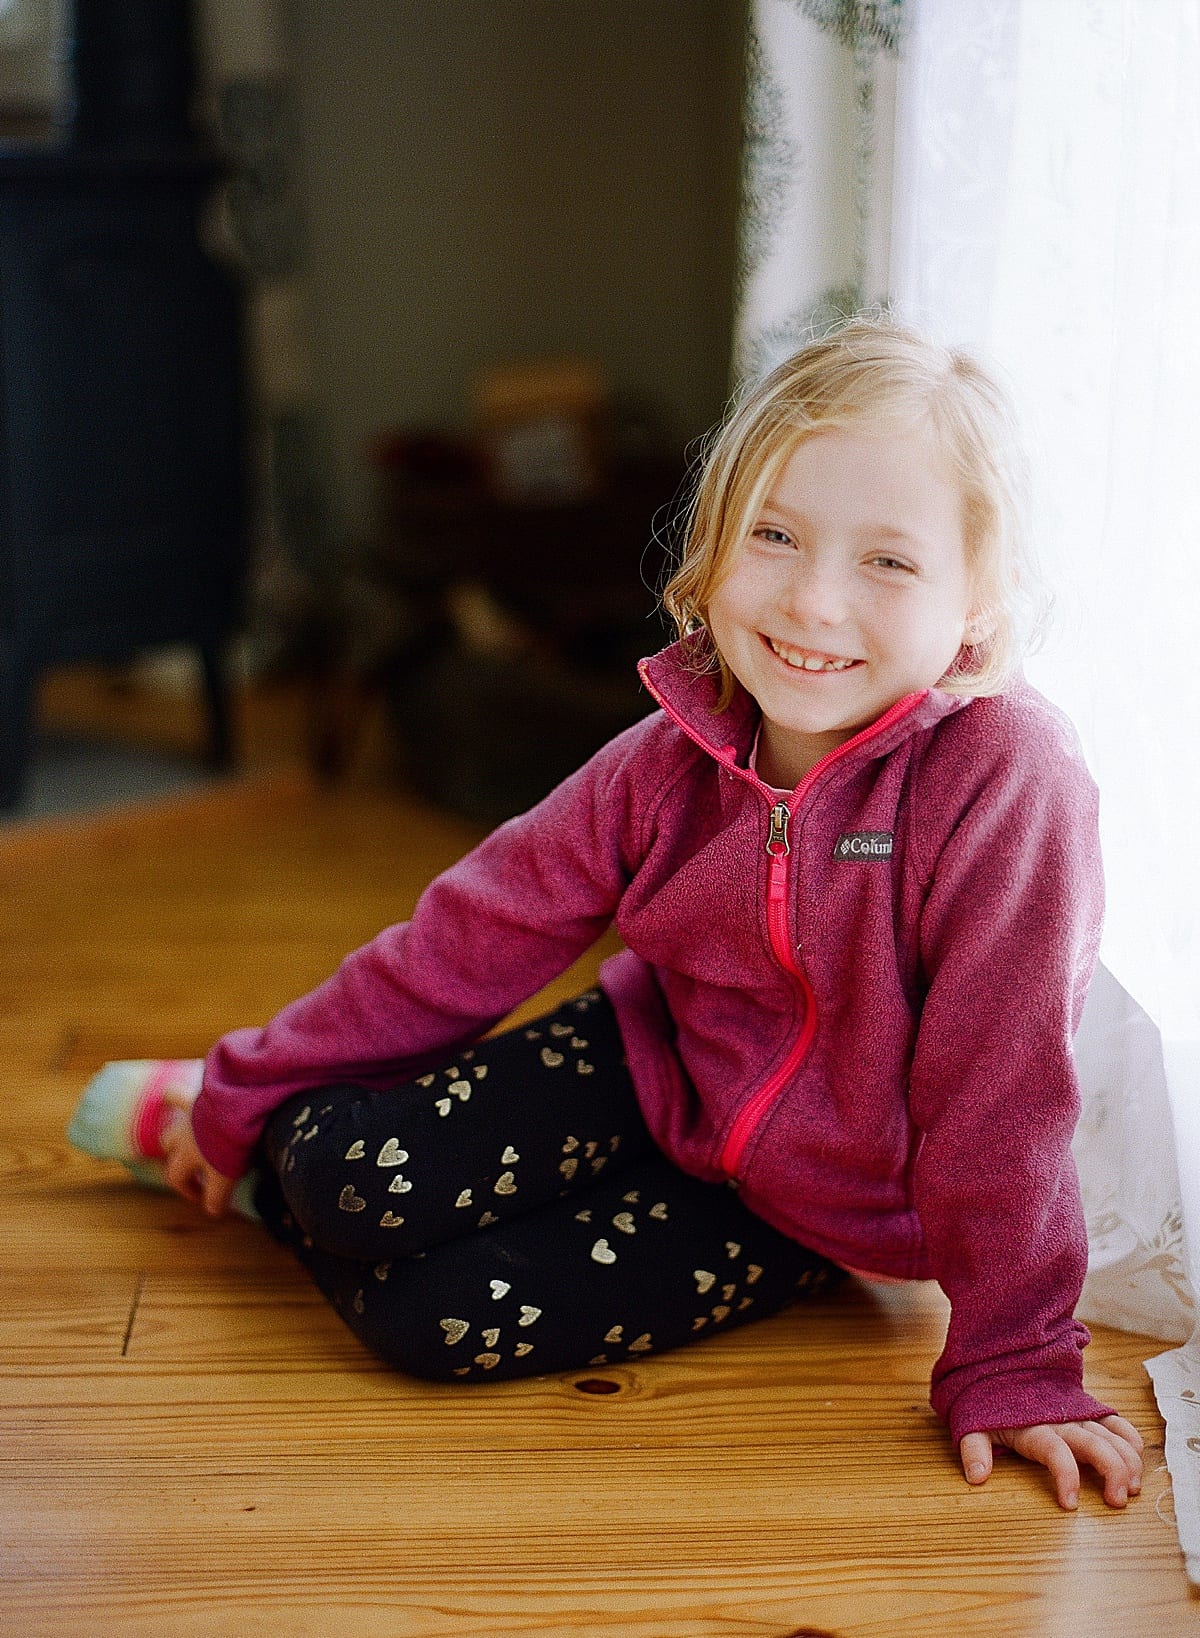 Little girl sitting by window smiling at camera photo 